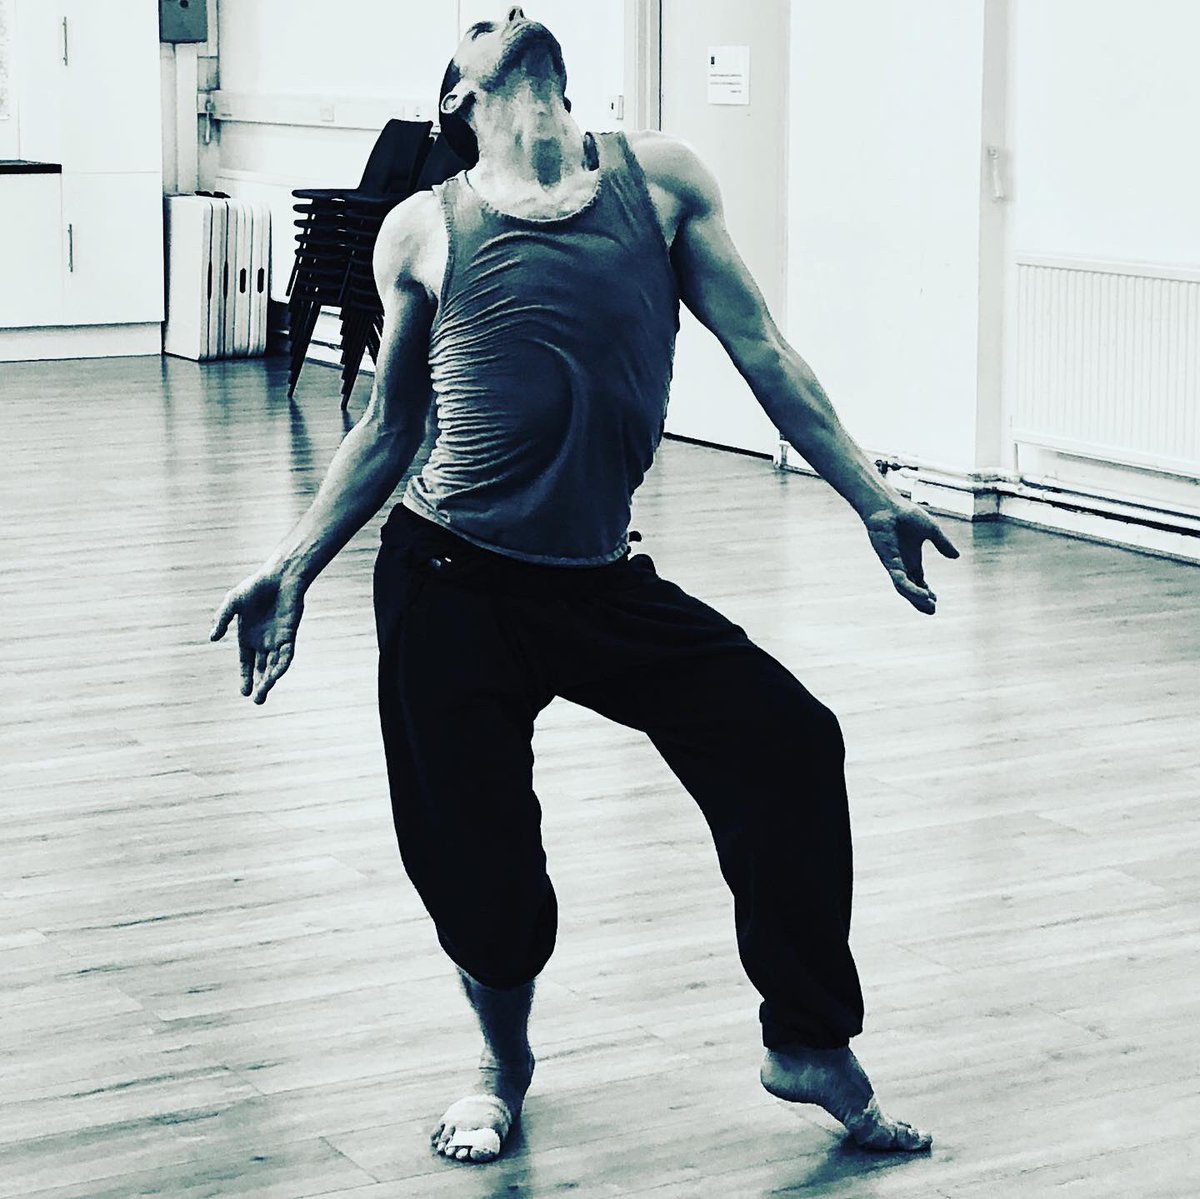 Back in the studio with @JonGoddard_ @YorkeDance creating a solo inspired by Andreas Vesalius @Centre151 #body #sculpture #movement #dance